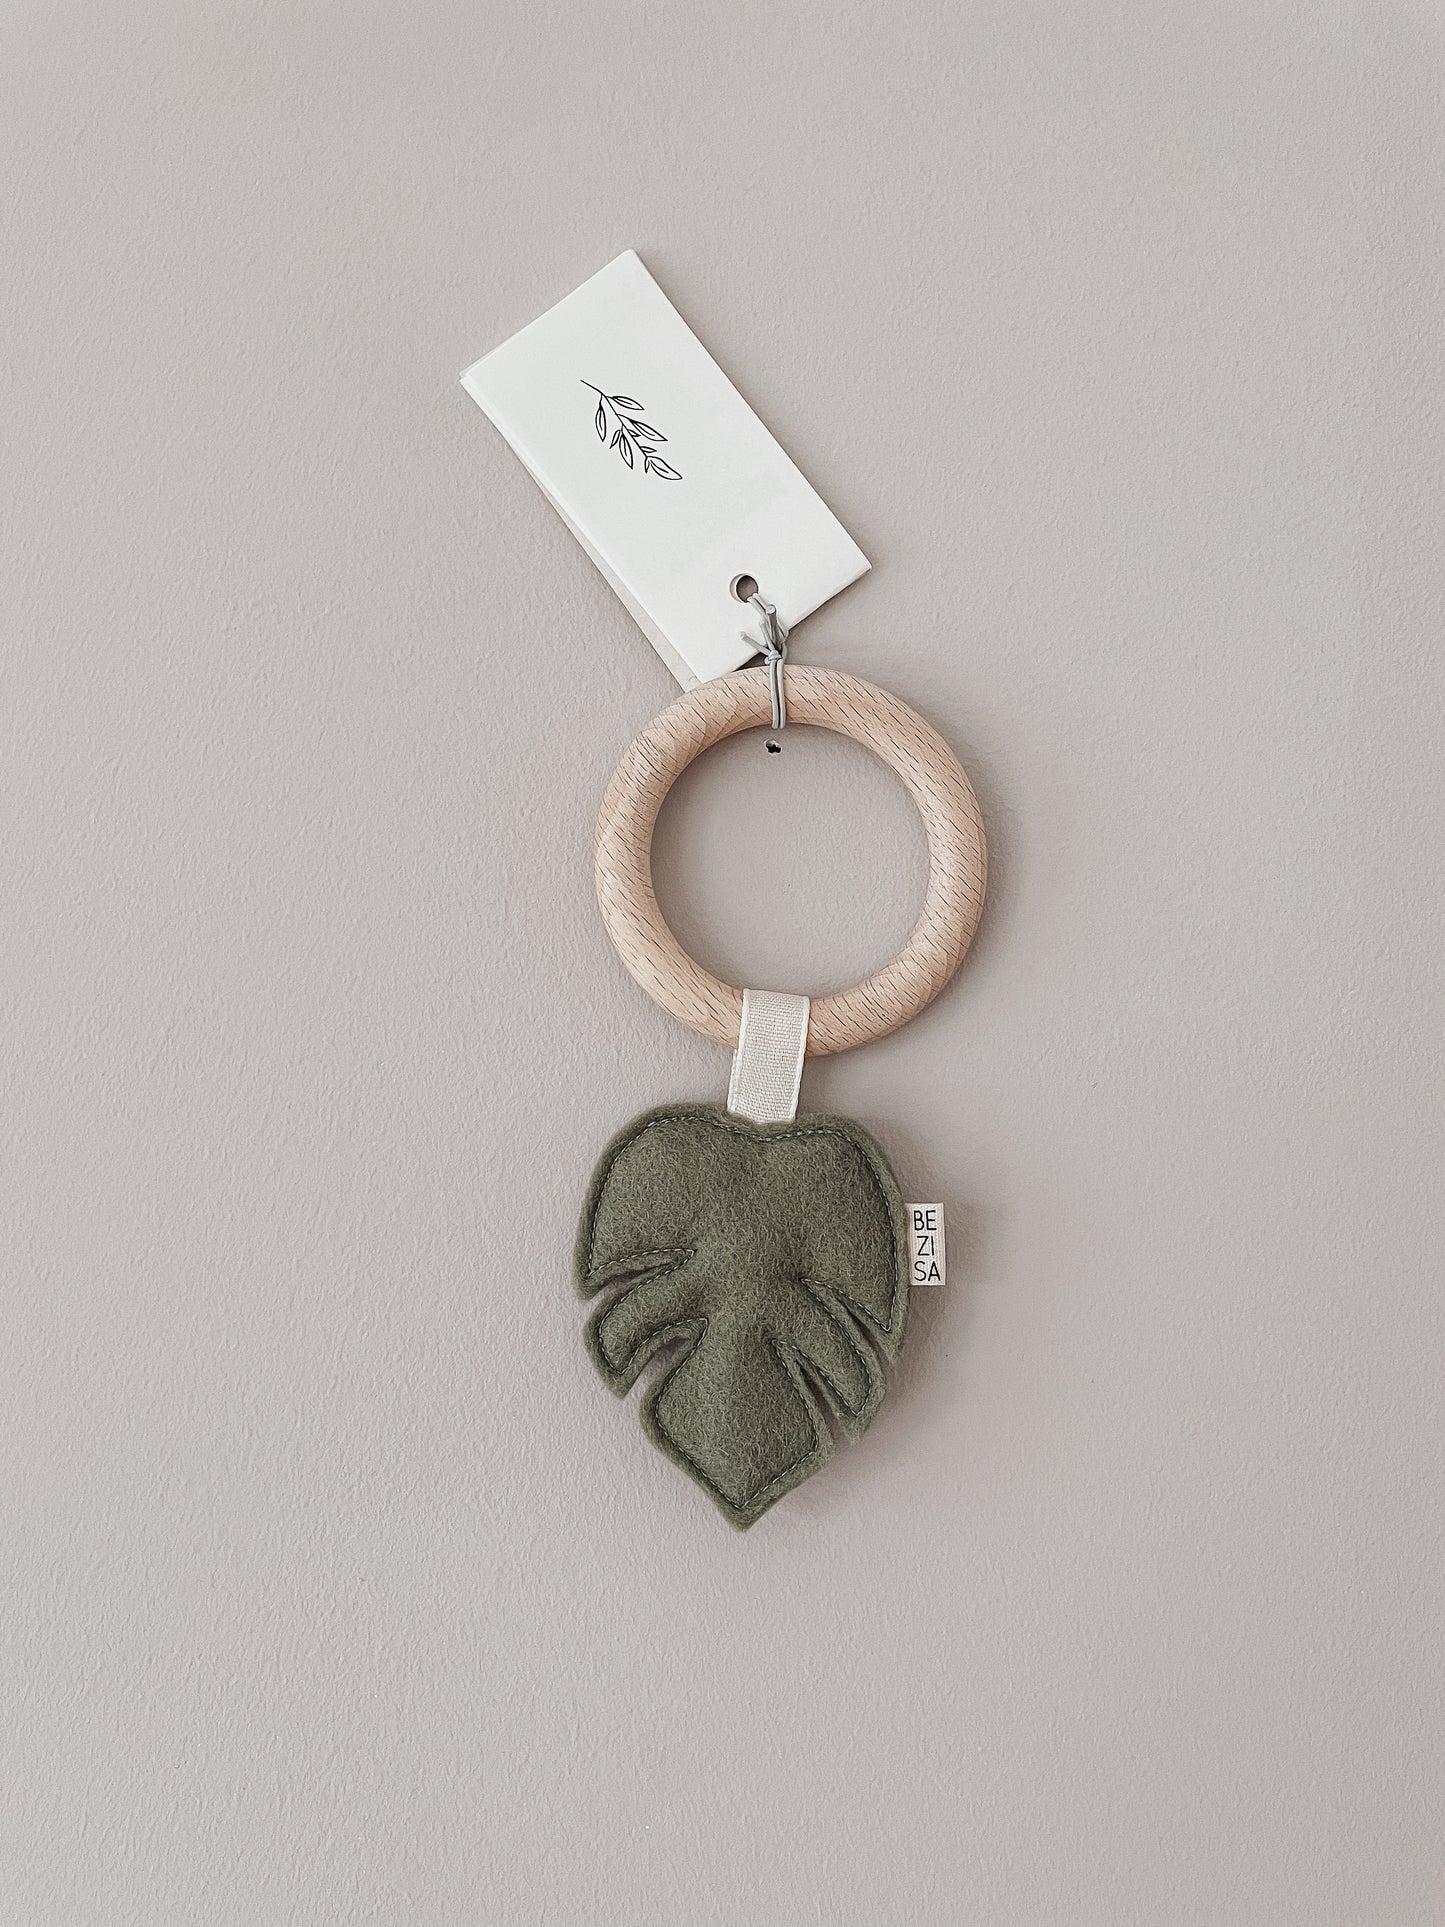 Baby teether from Bezisa, monstera leaf in pistachio green felt with a beech wood ring. Photographed on a plain neutral background.